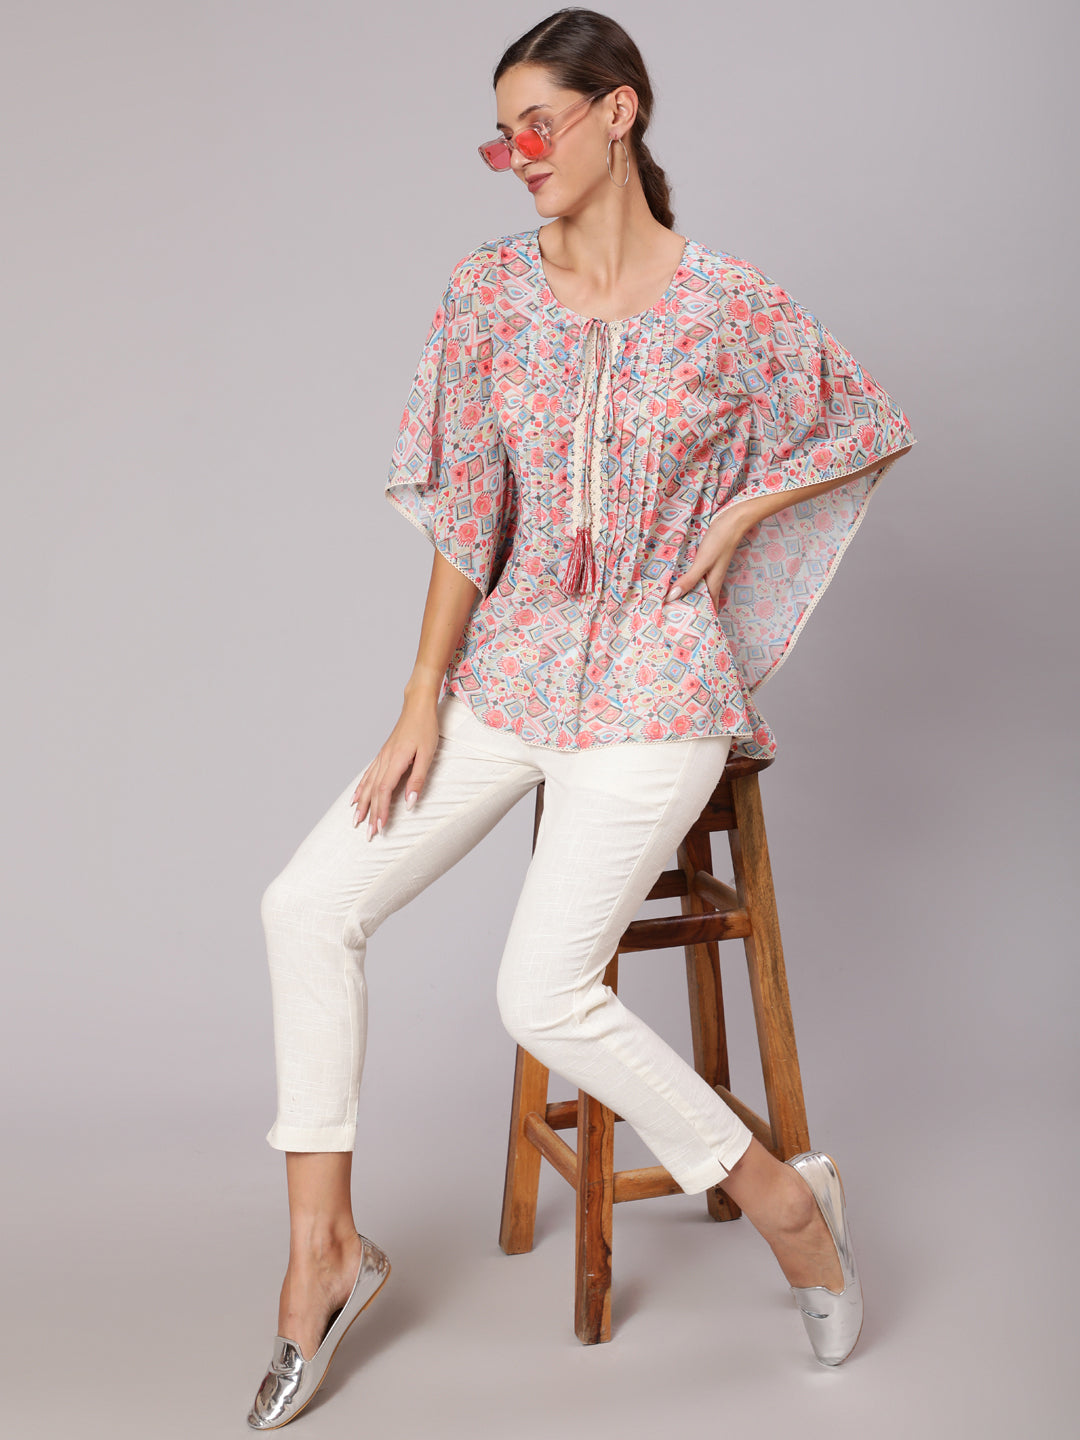 Peach Geometric Printed Georgette Kaftan Top With Pintucks And Lace Details At The Yoke